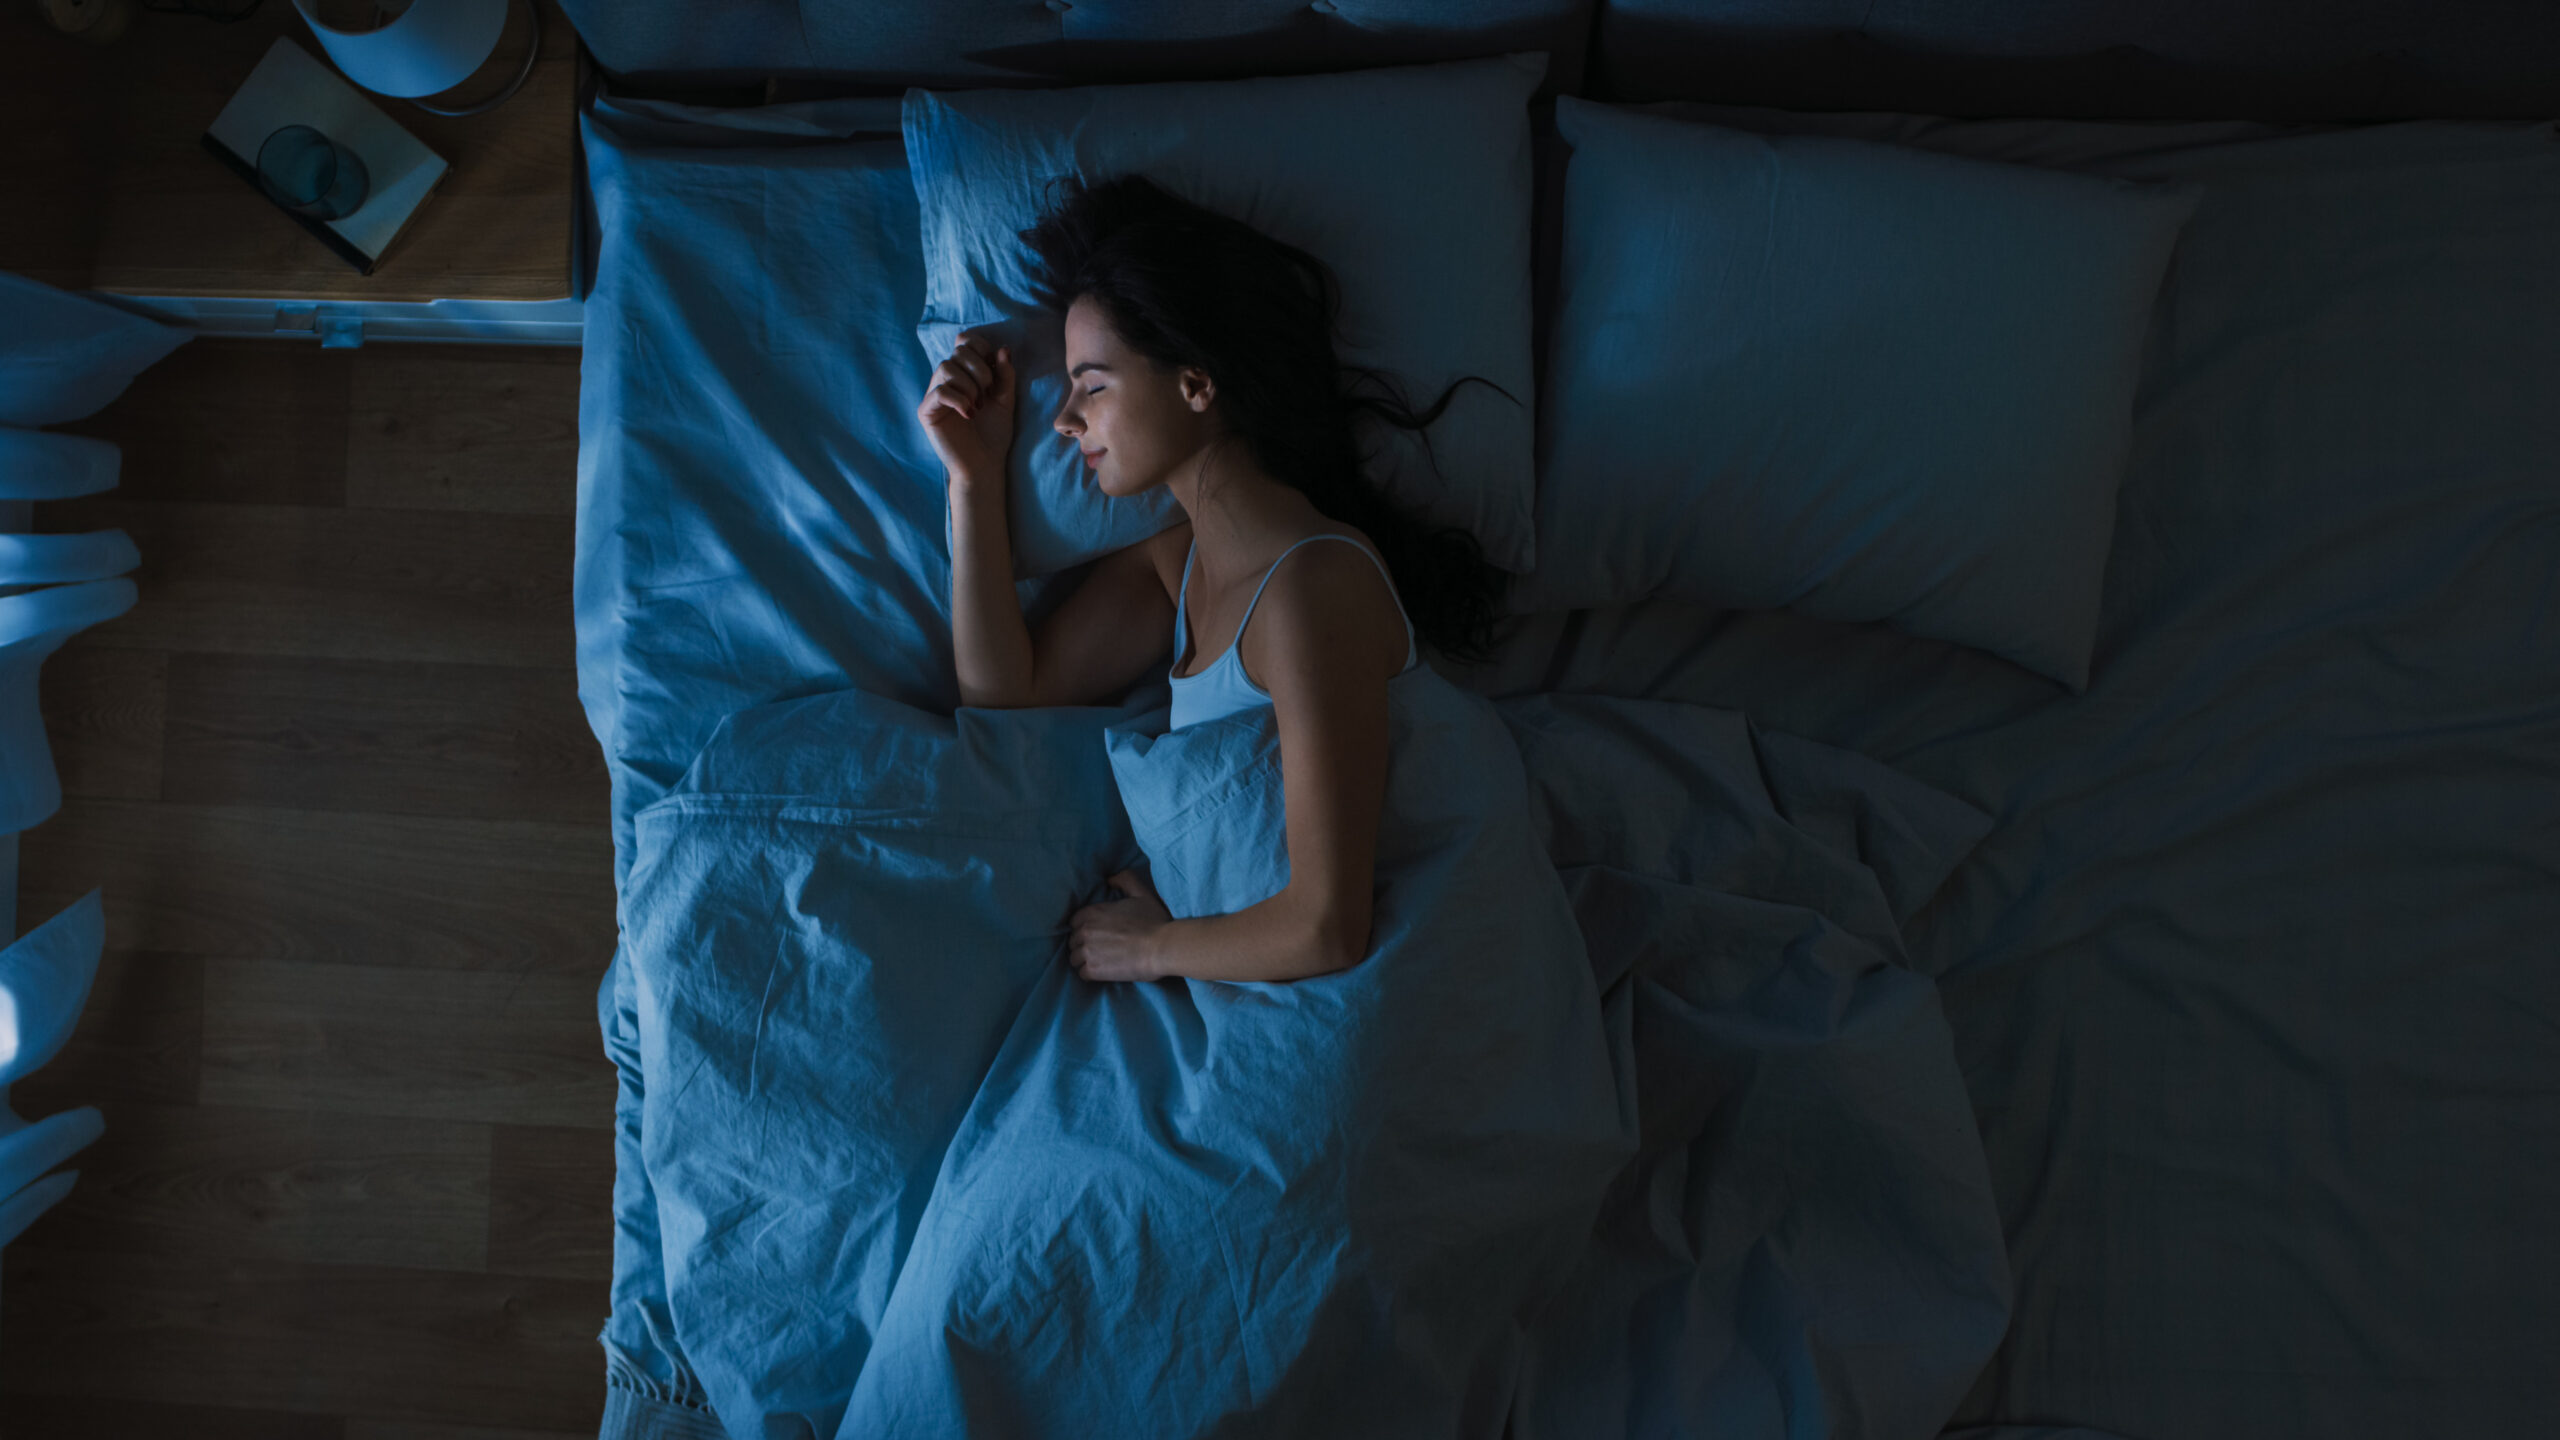  Improving Sleep Hygiene is Absolutely Crucial to Long-Term Health